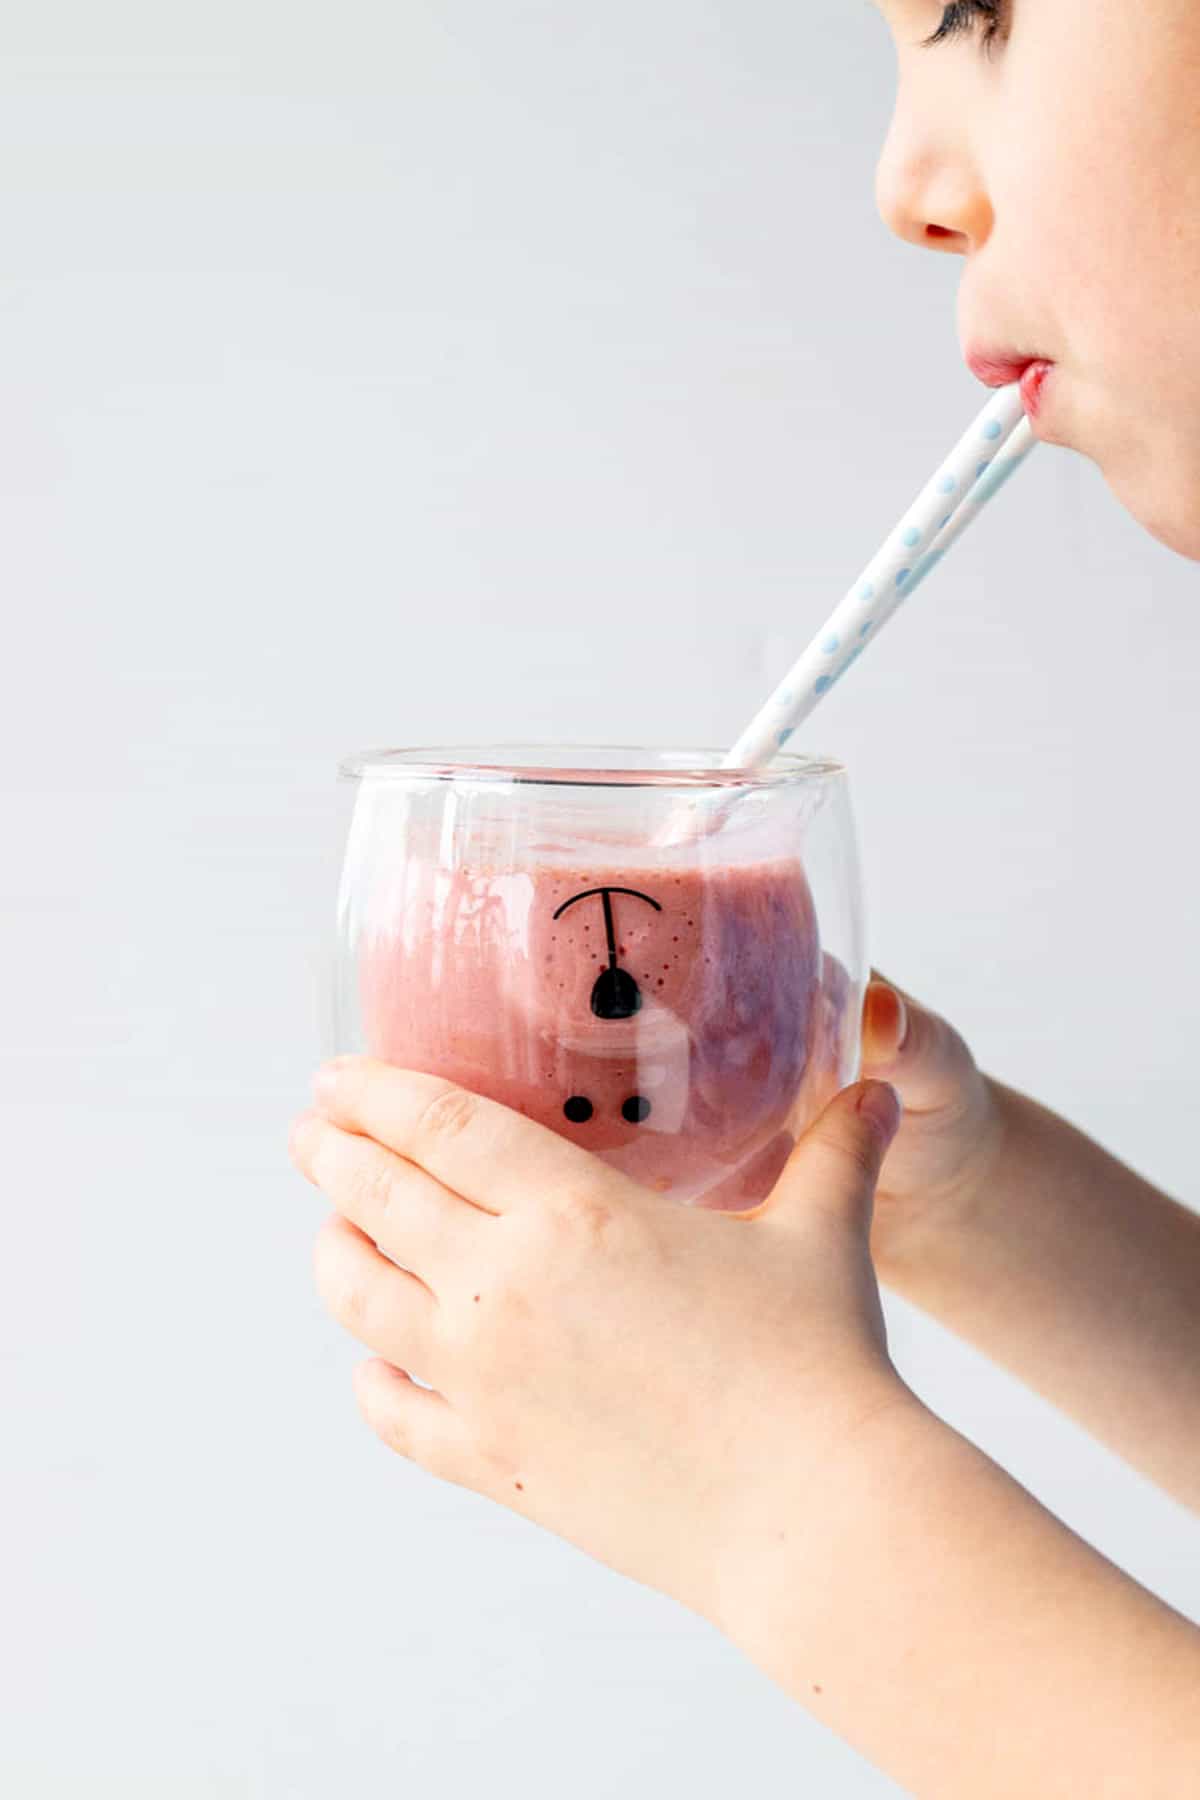 A young boy holding a glass of strawberry banana smoothie drinking some from a straw.